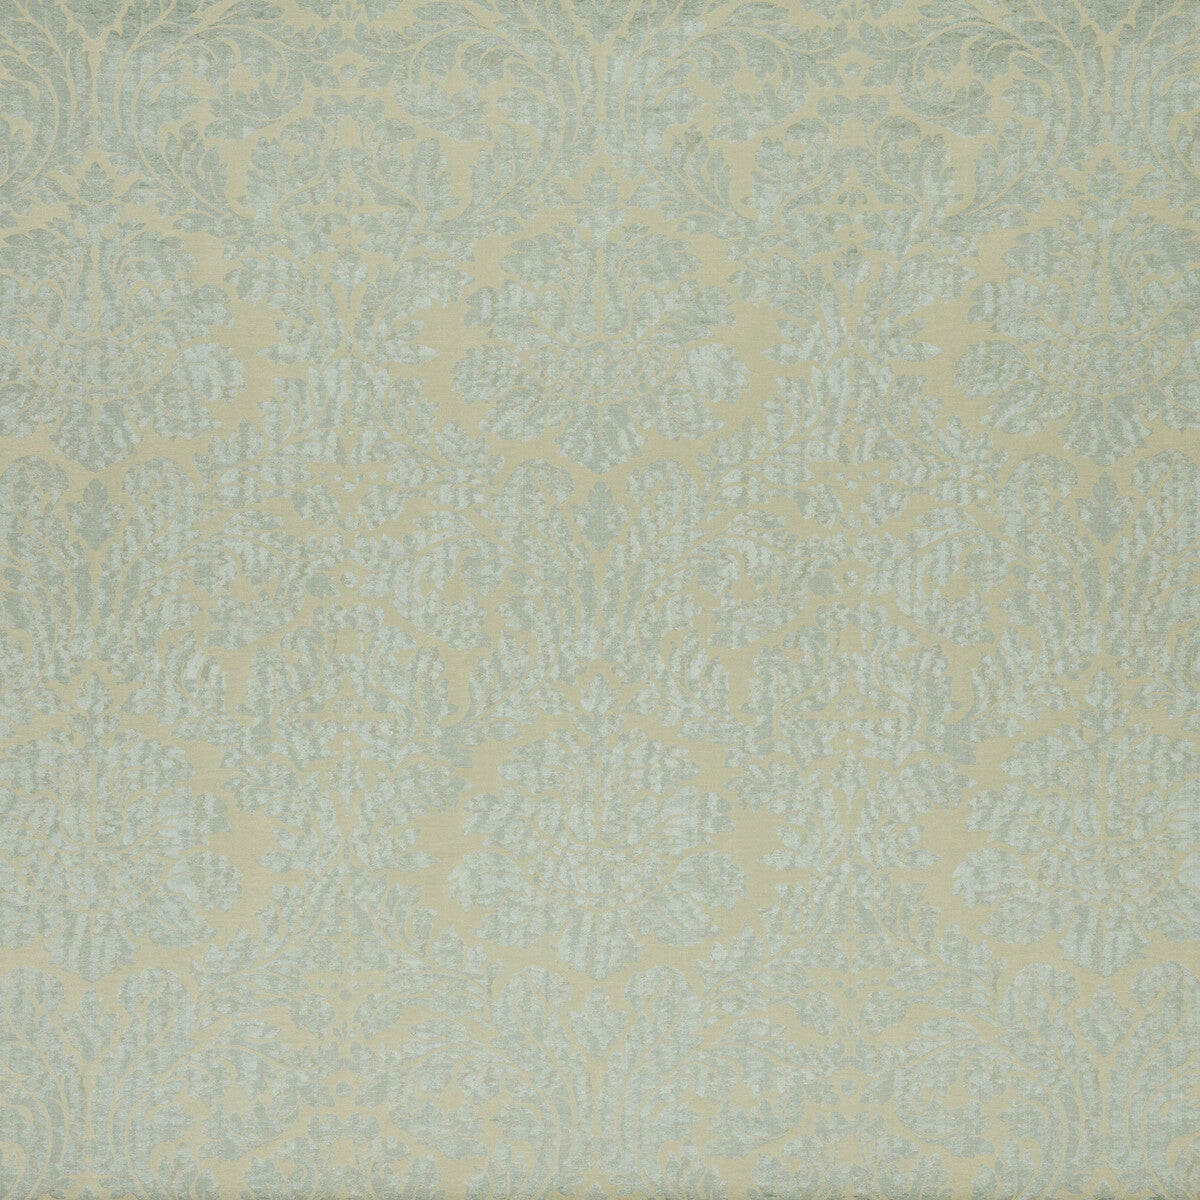 Sibley fabric in aqua/bronze color - pattern BF10615.725.0 - by G P &amp; J Baker in the Cosmopolitan collection